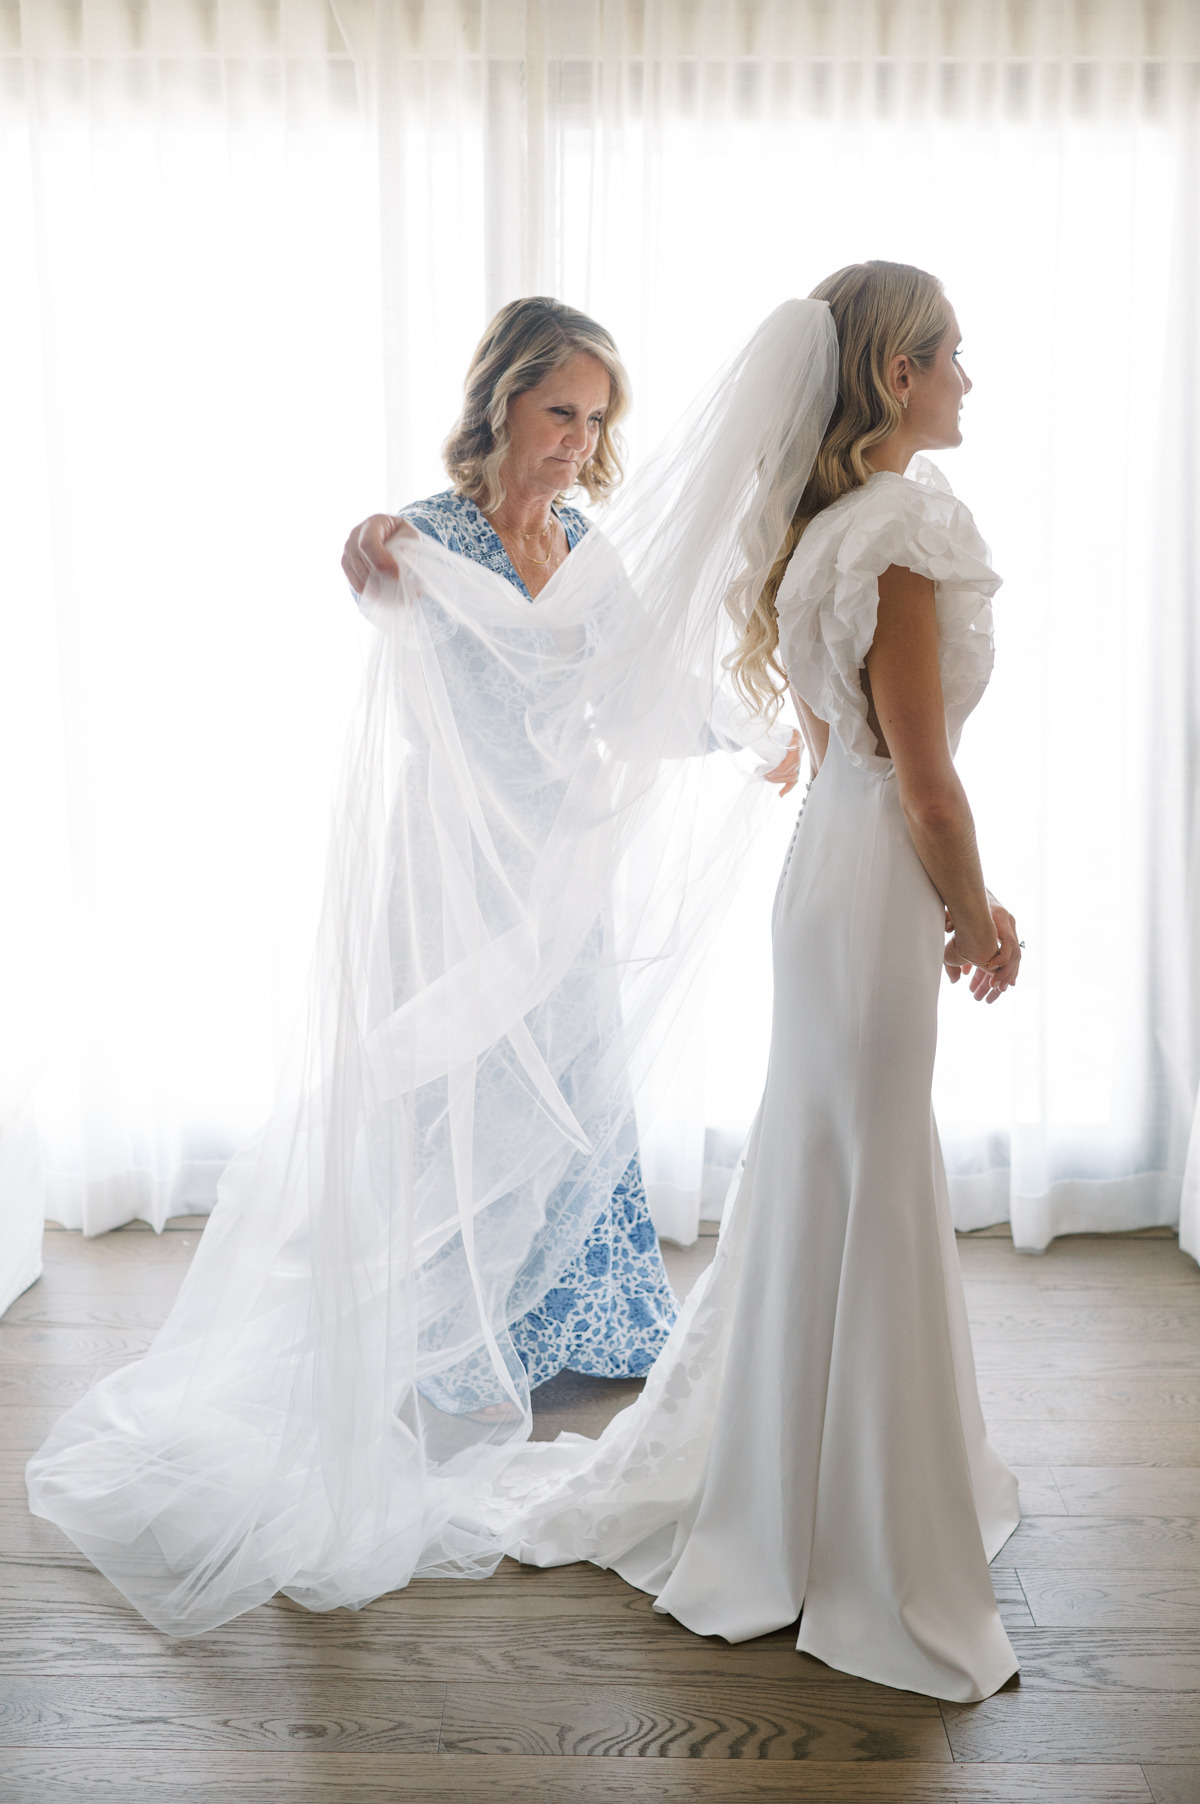 Mother of the bride helping bride with veil